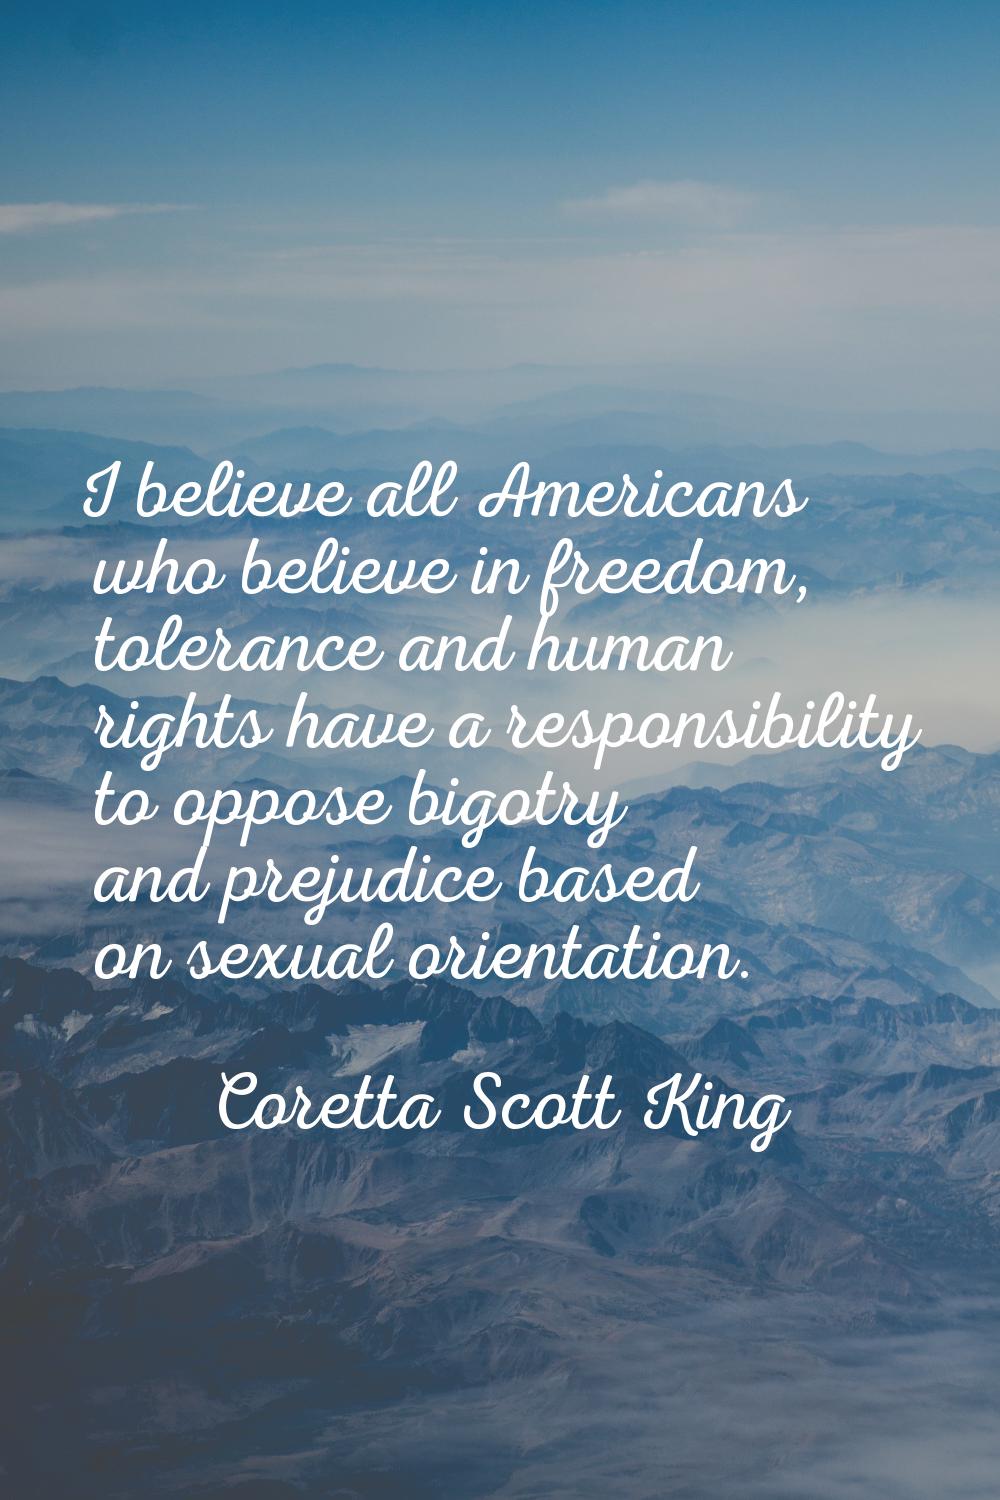 I believe all Americans who believe in freedom, tolerance and human rights have a responsibility to